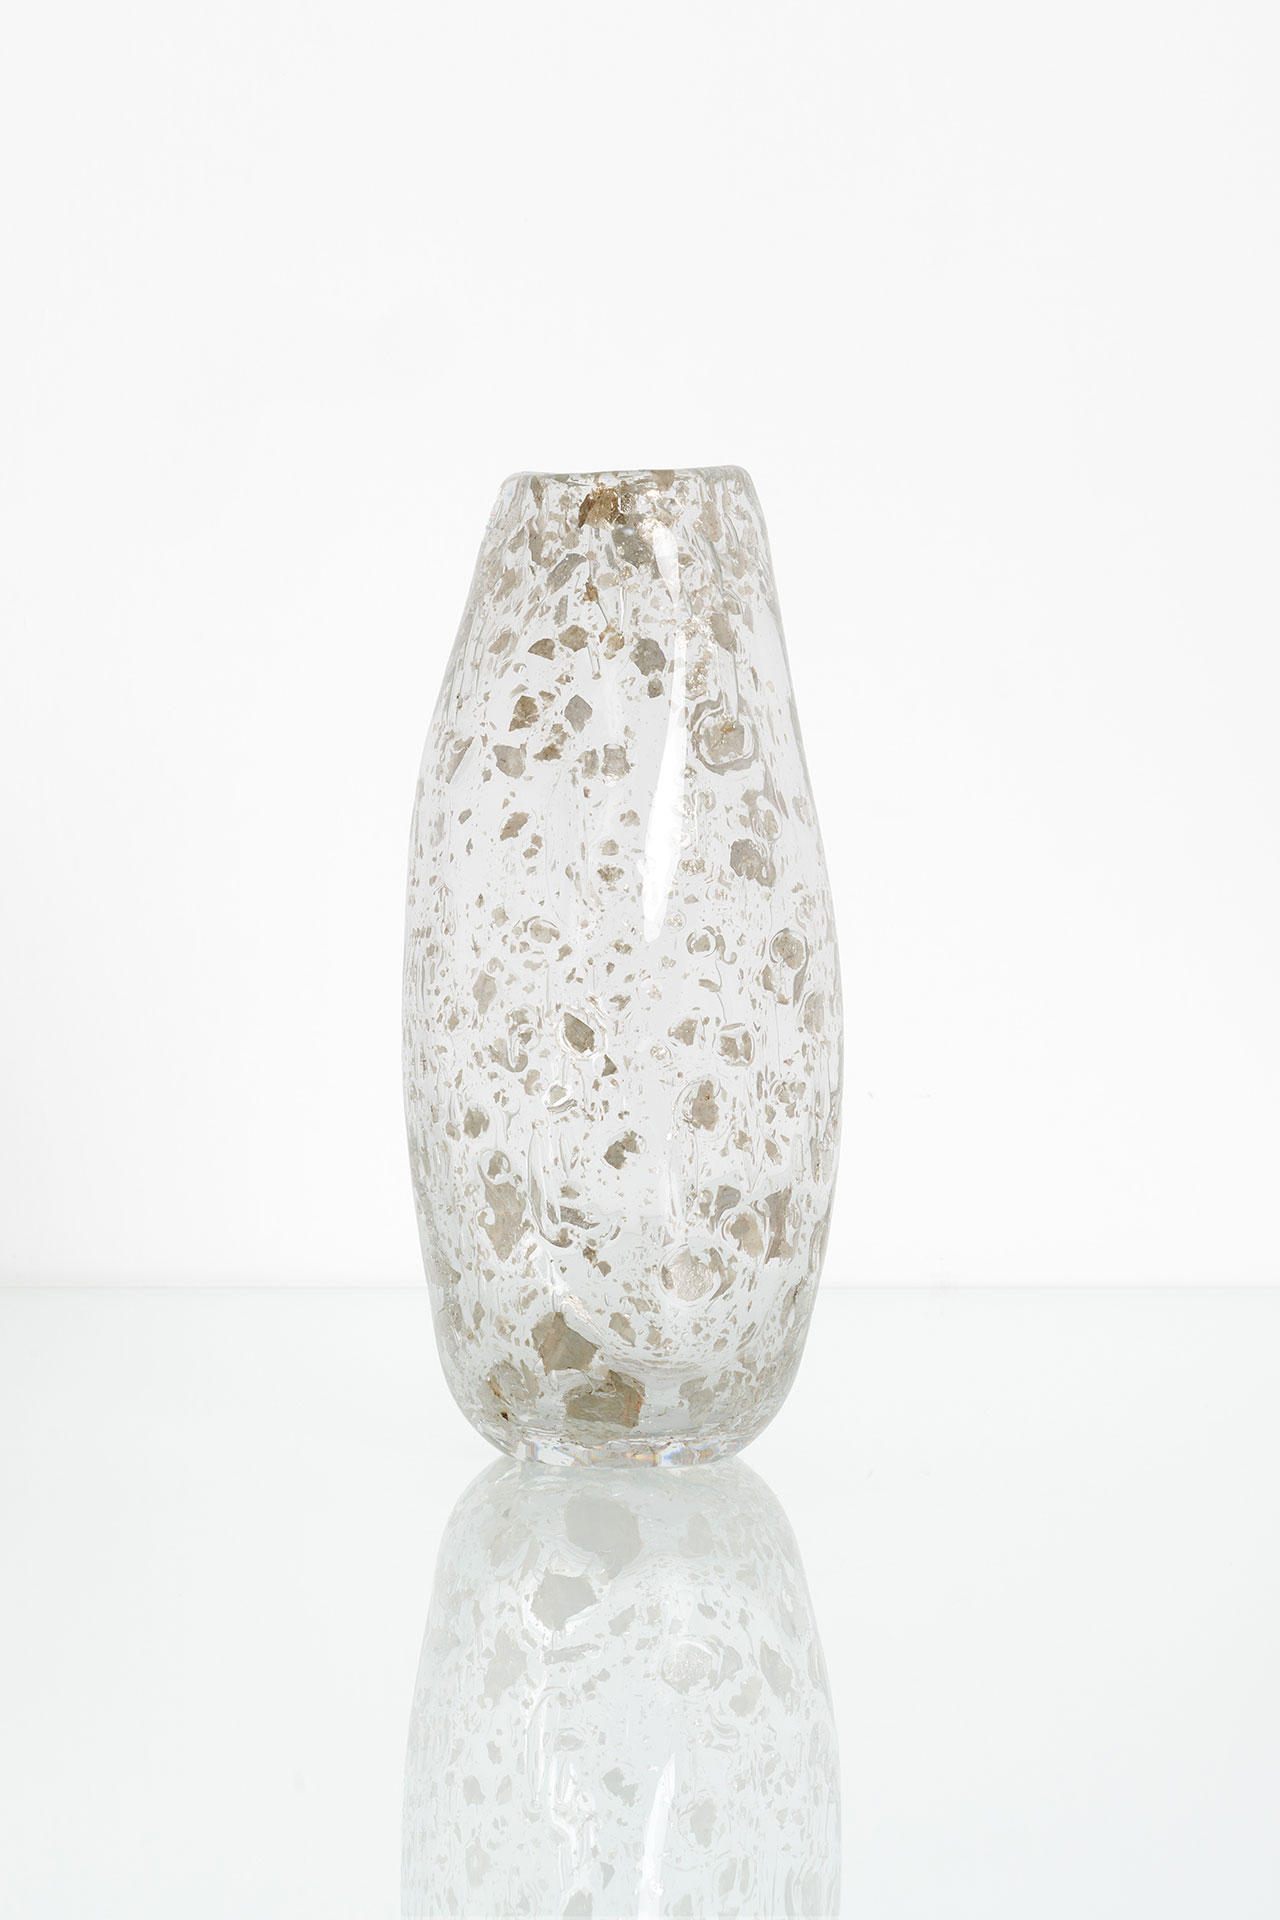 Vase Levitation Alchemia by Sophie Dries. Photography by Filippo Pincolini.